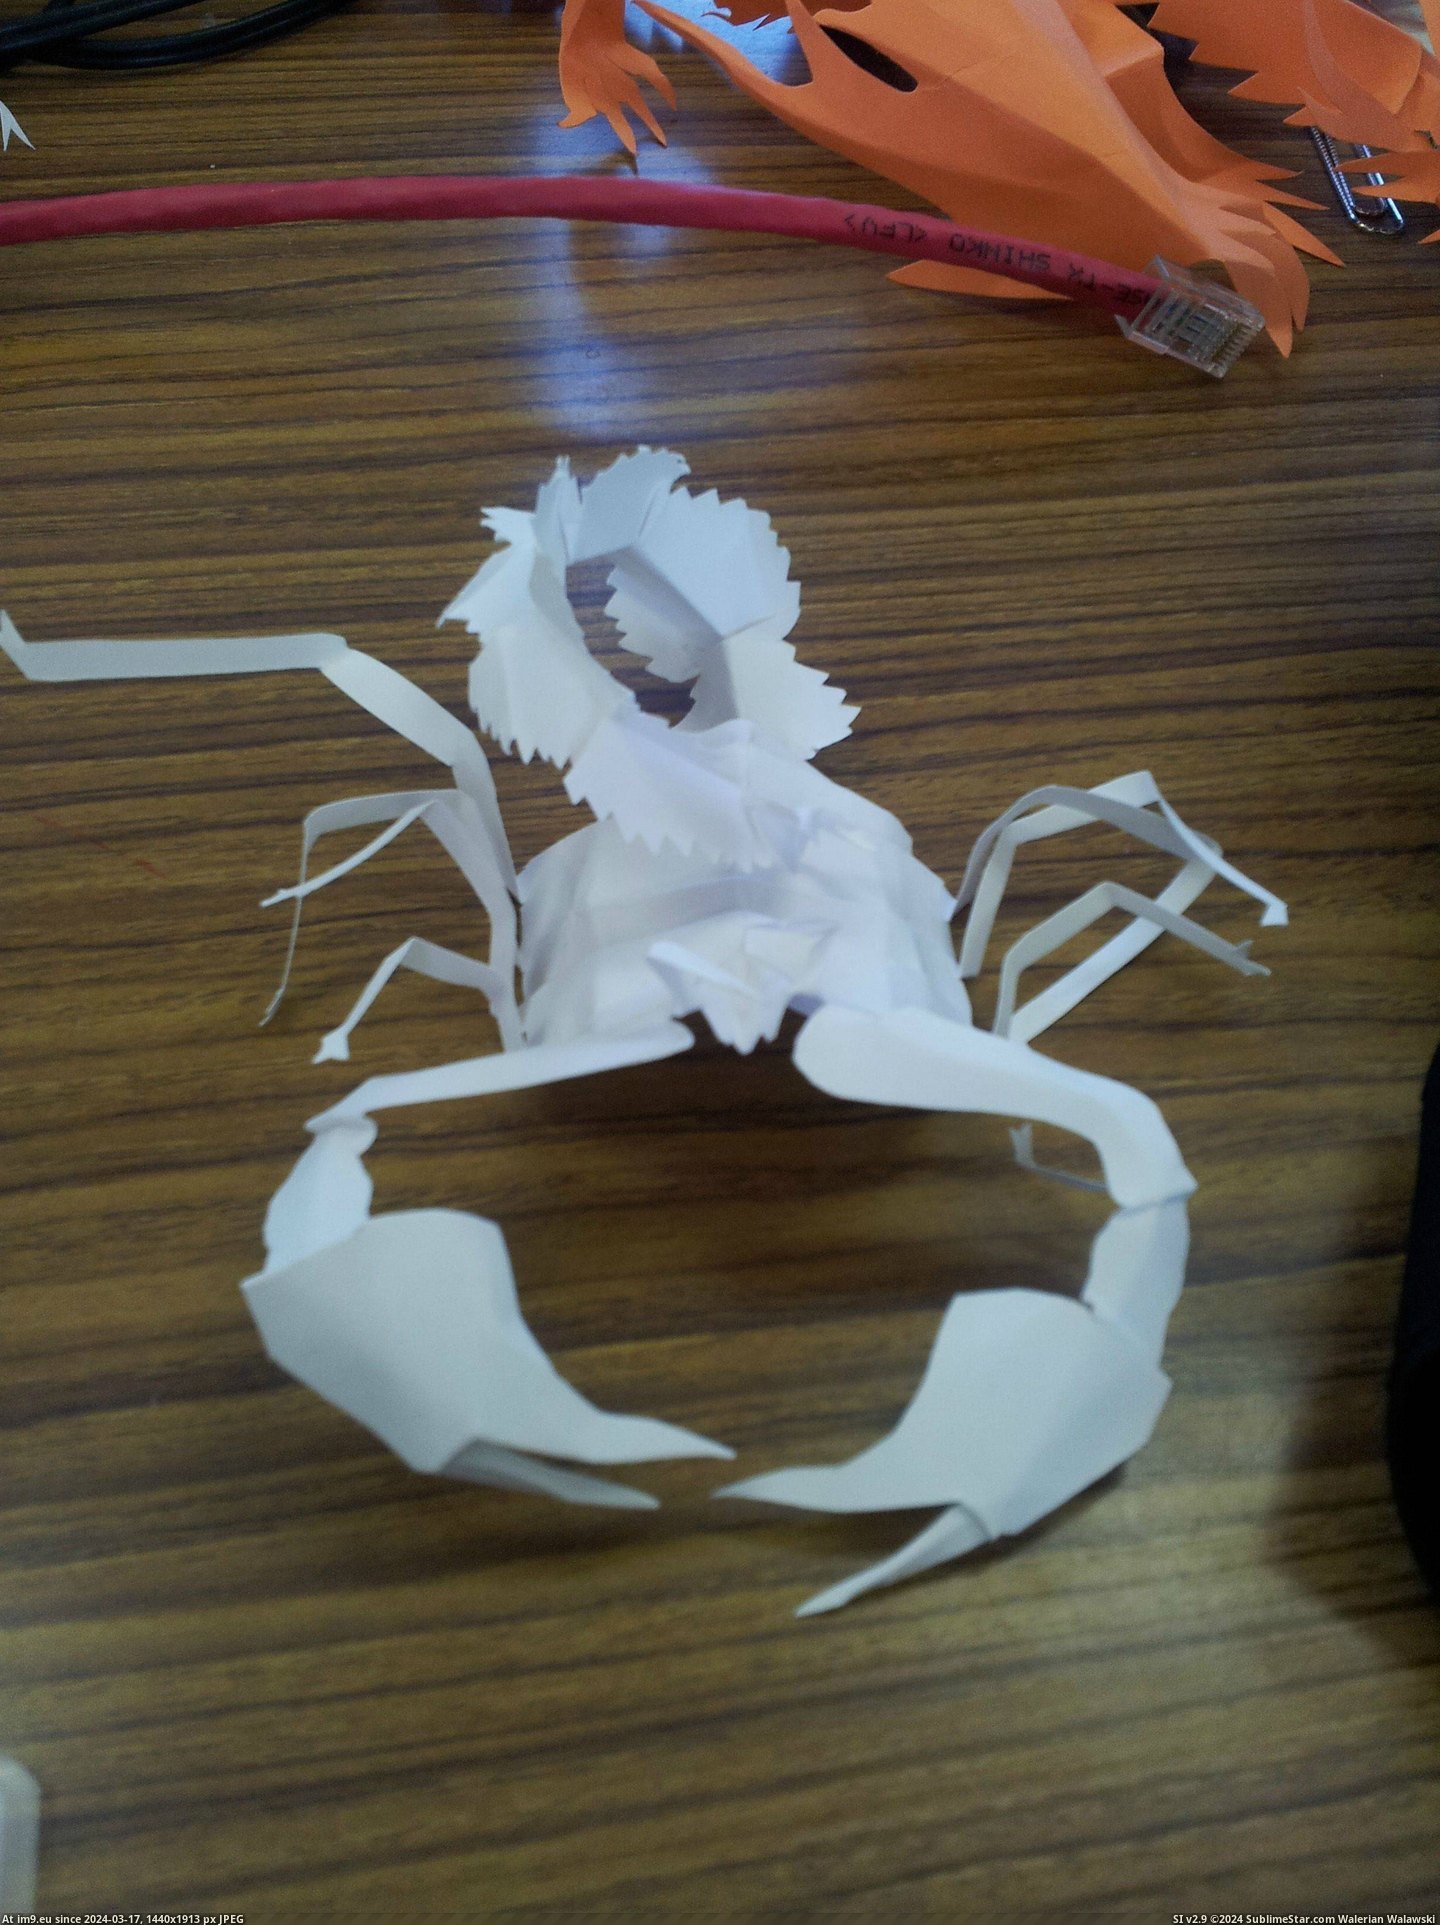 #One #Paper #Students #Creatures #Freehand #Bored #Completely [Pics] One of my students makes these creatures out of paper completely freehand whenever he is bored 7 Pic. (Bild von album My r/PICS favs))